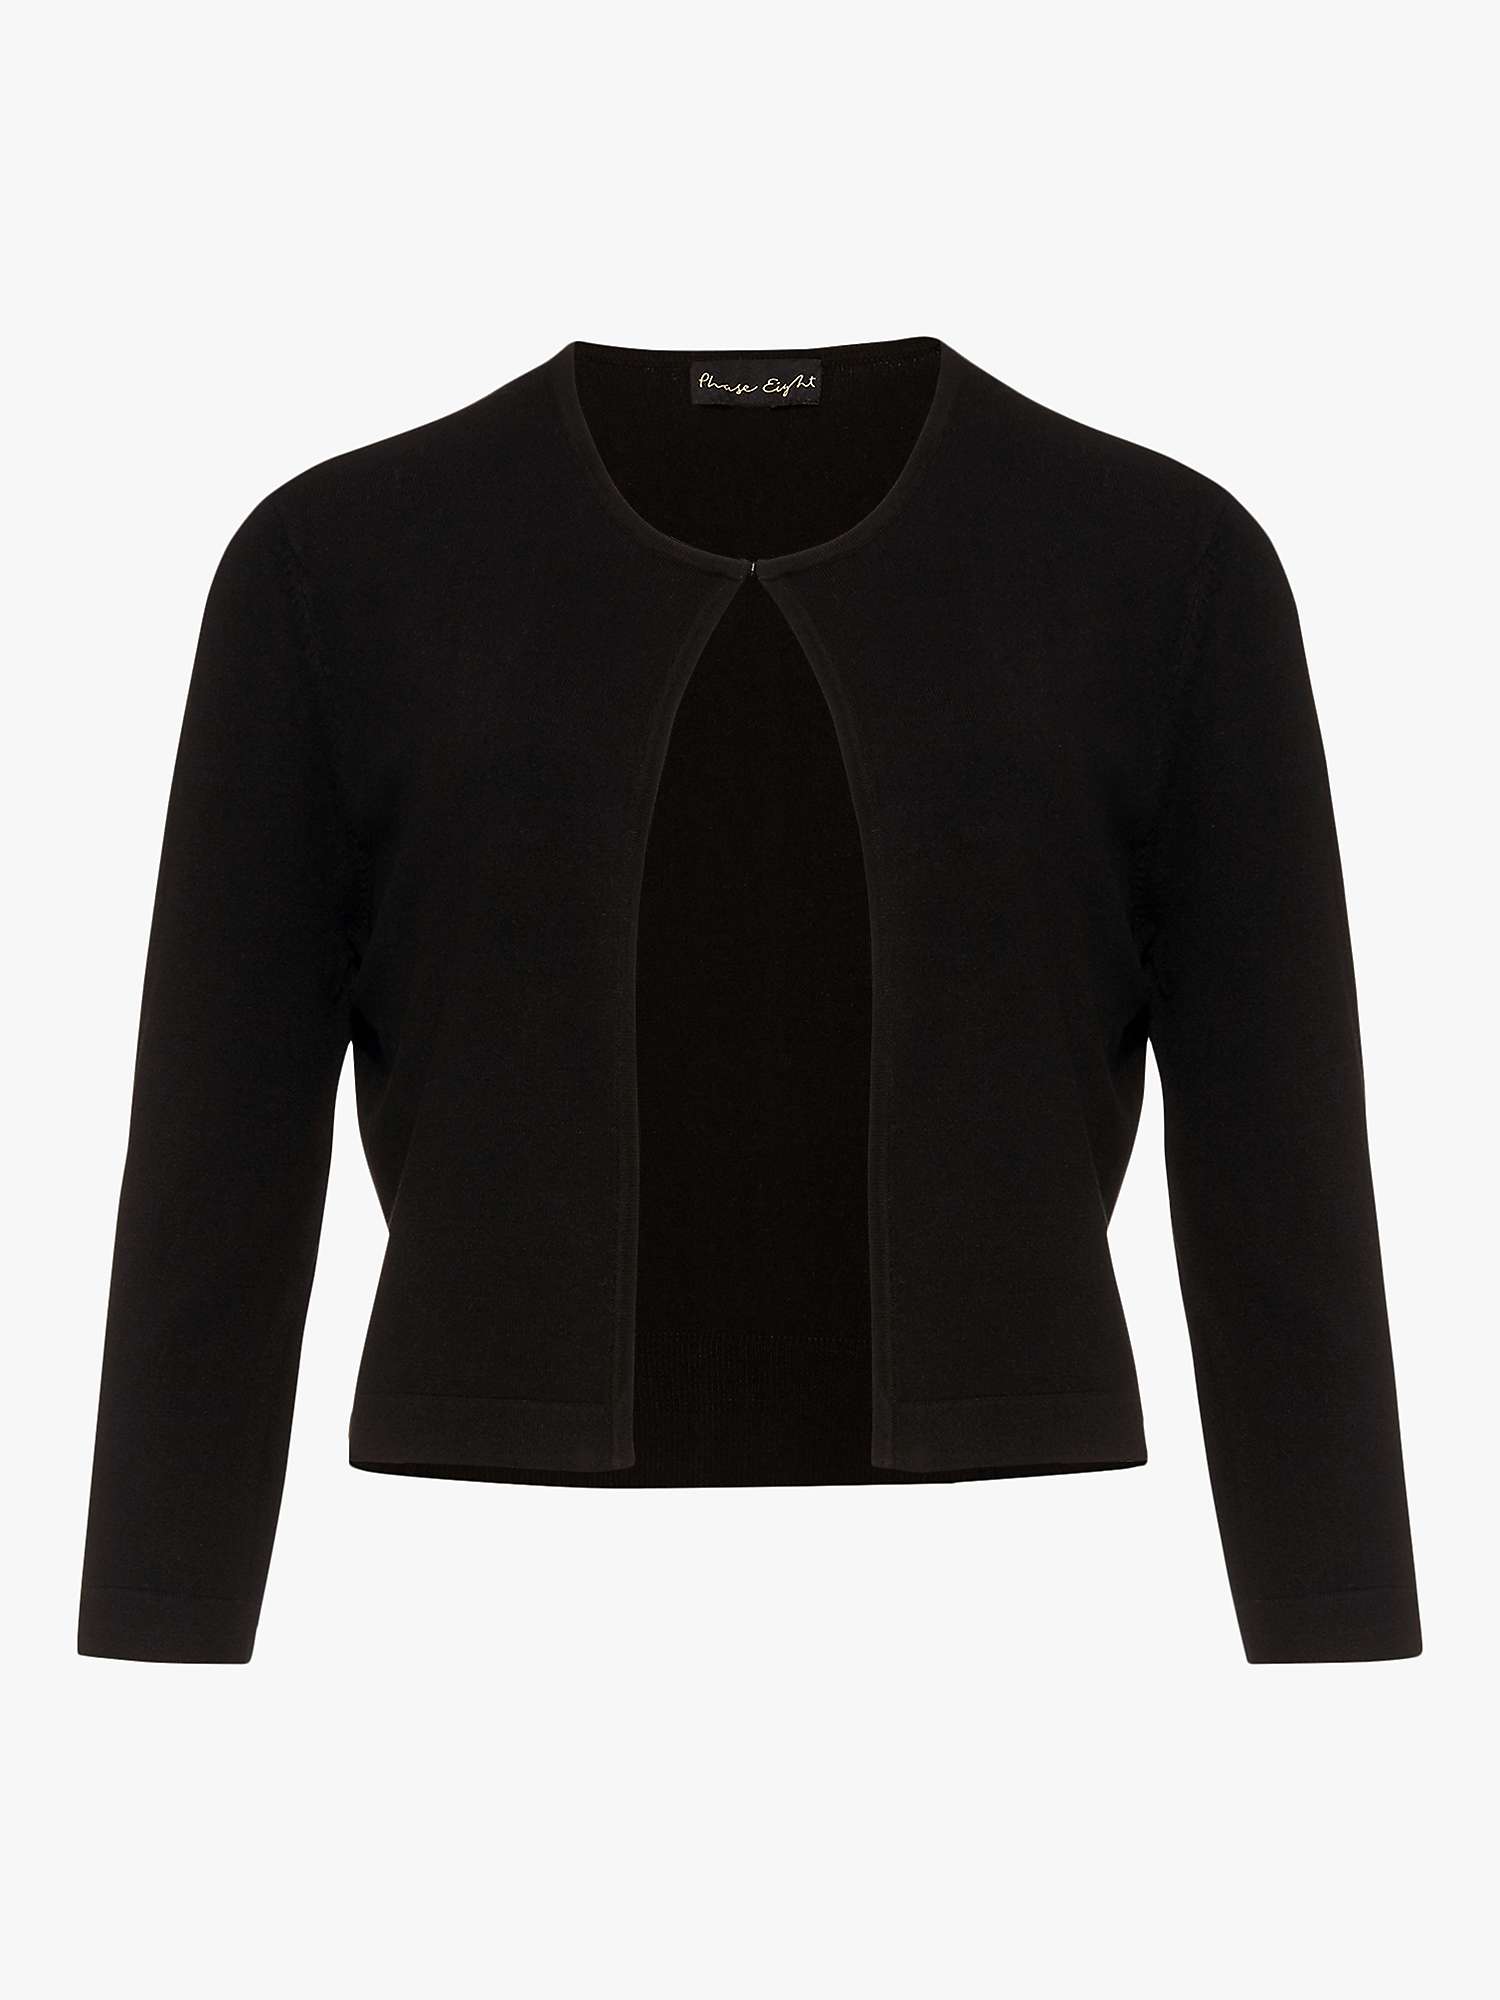 Buy Phase Eight Catie Cardigan Online at johnlewis.com